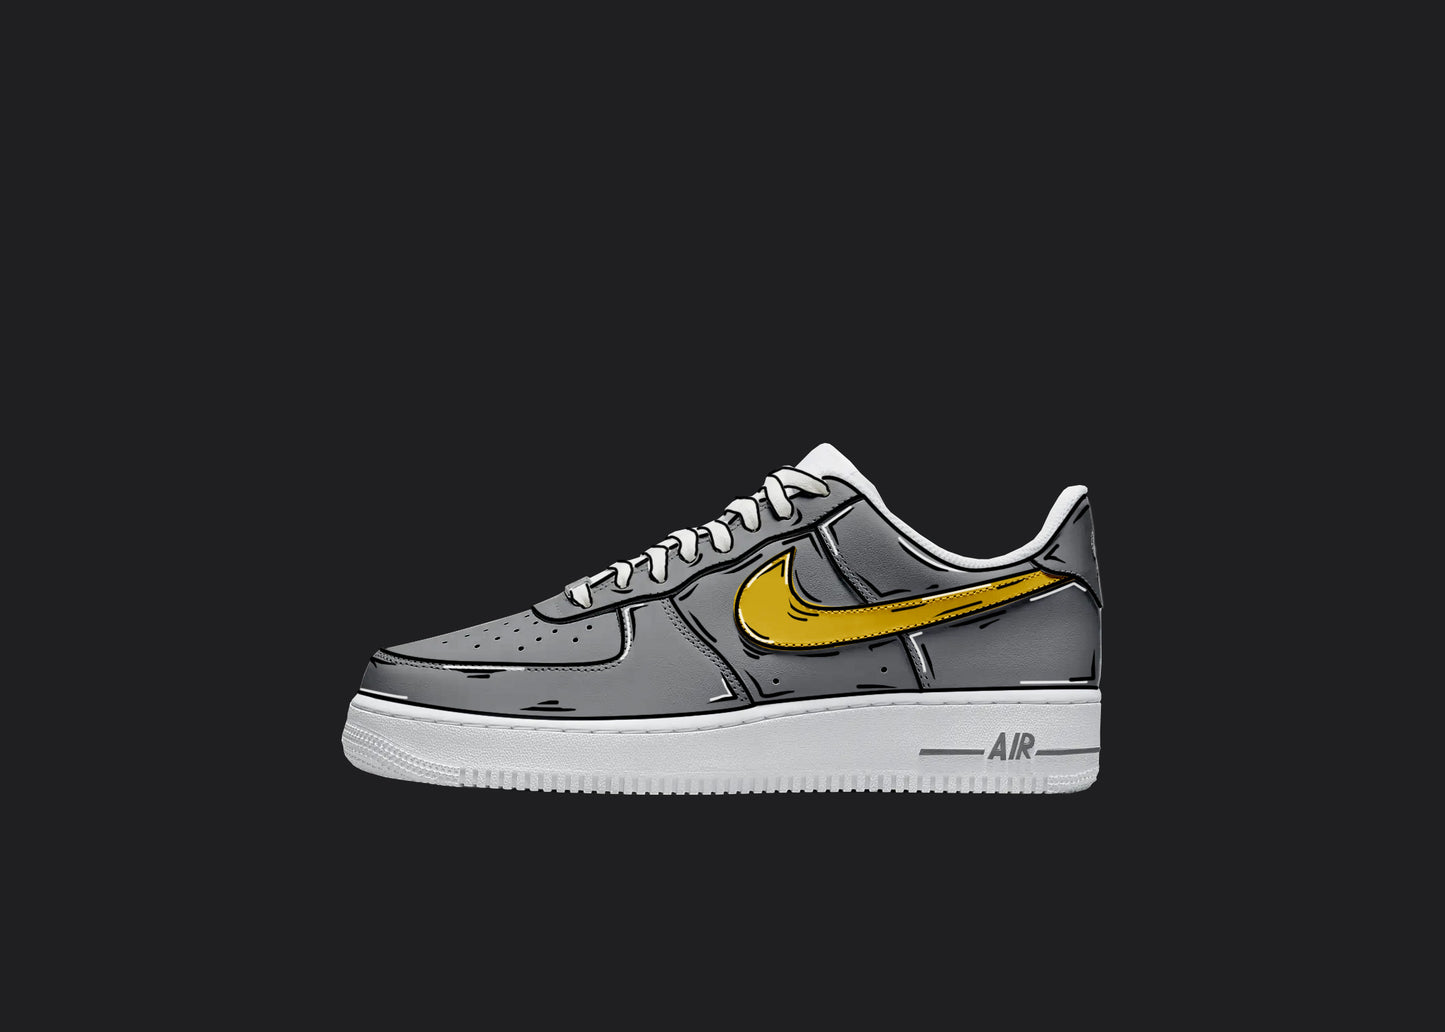 white nike air force 1 sneakers covered with a gray handpainted color and a yellow nike swoosh. the design also has cartoon outline detilas in white and black covering the entire sneakers